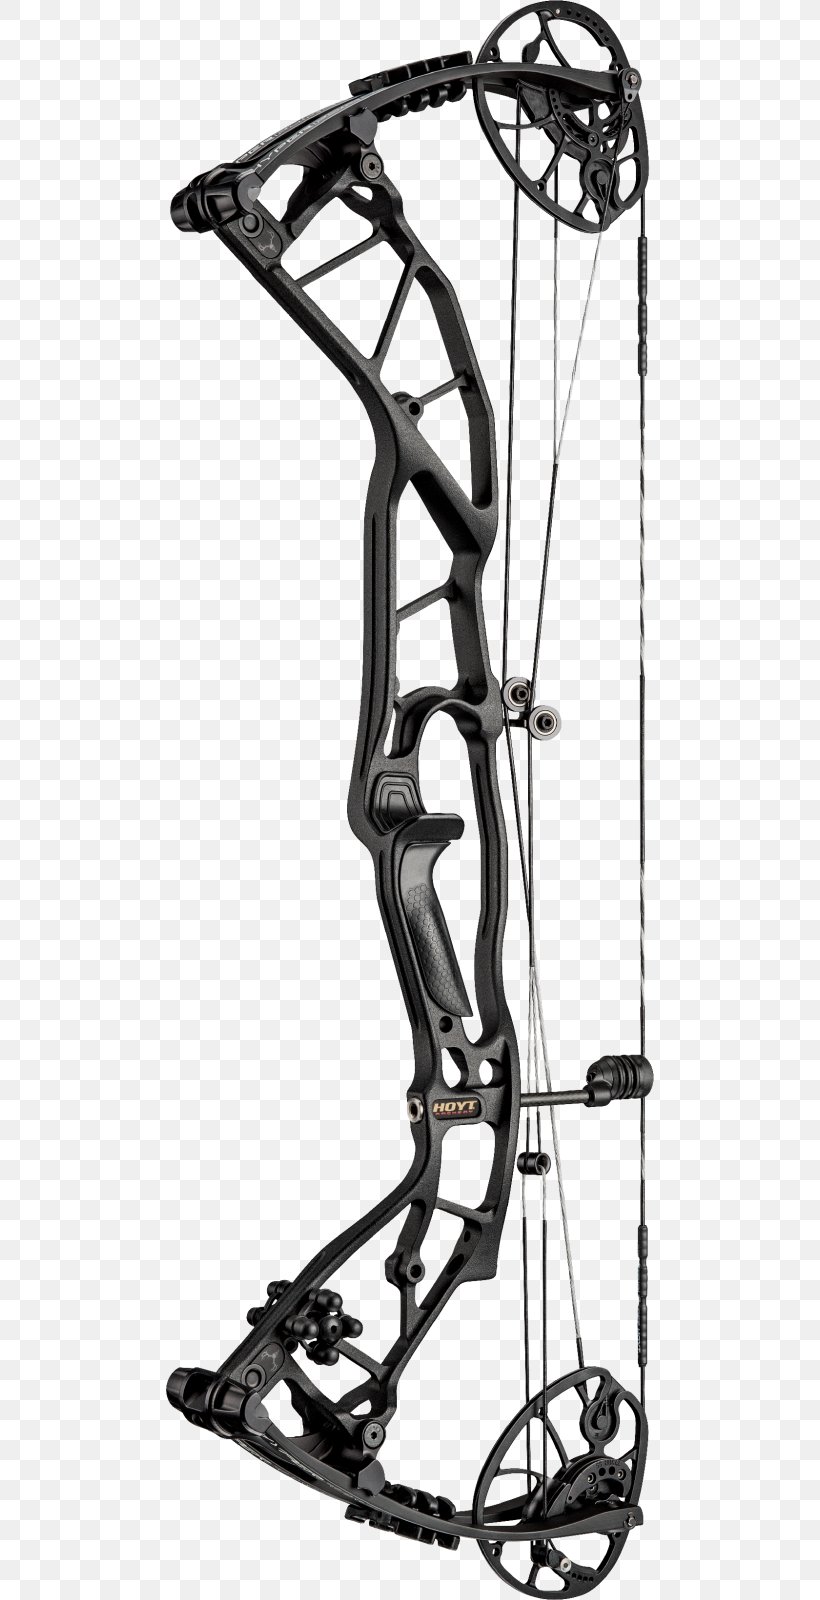 Compound Bows Bow And Arrow Archery Bowhunting, PNG, 488x1600px, Compound Bows, Advanced Archery, Apex Hunting, Archery, Archery Country Download Free